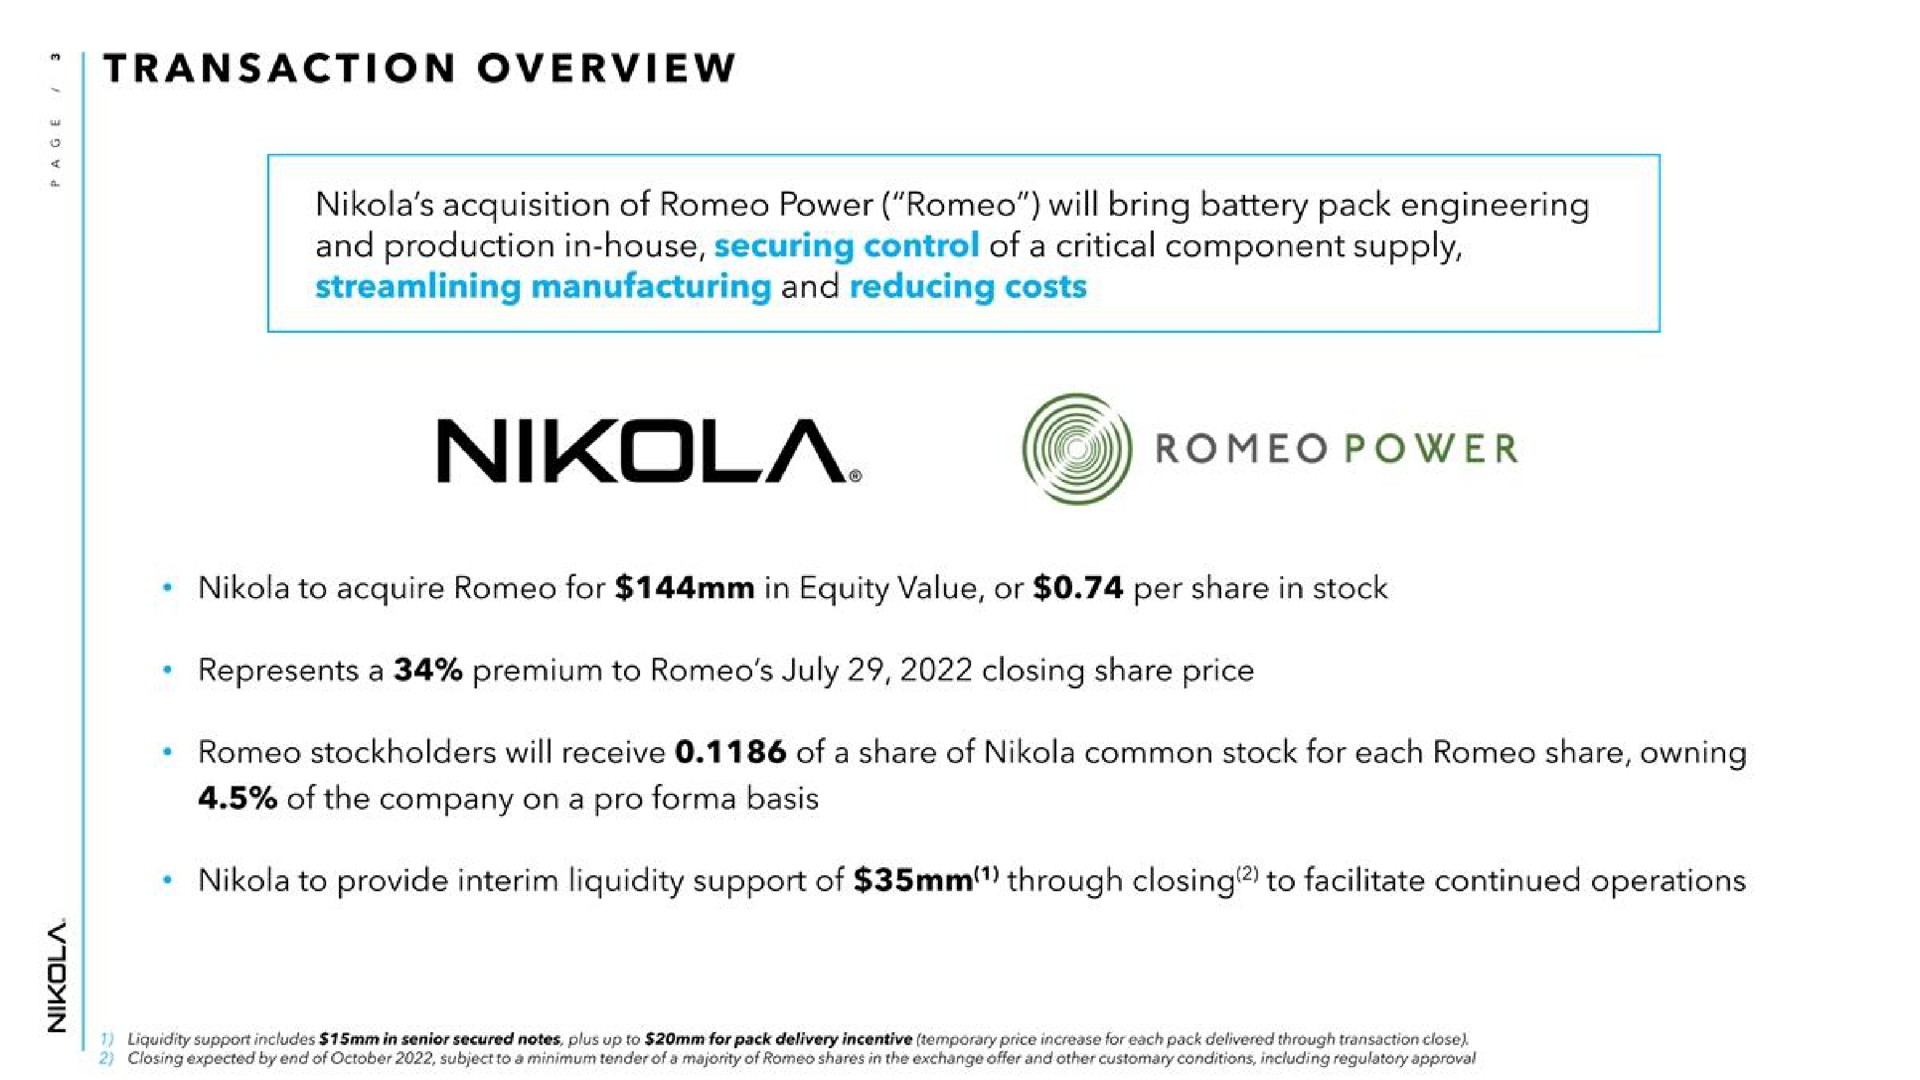 transaction overview acquisition of power will bring battery pack engineering and production in house securing control of a critical component supply streamlining manufacturing and reducing costs power to provide interim liquidity support of through closing to facilitate continued operations | Nikola